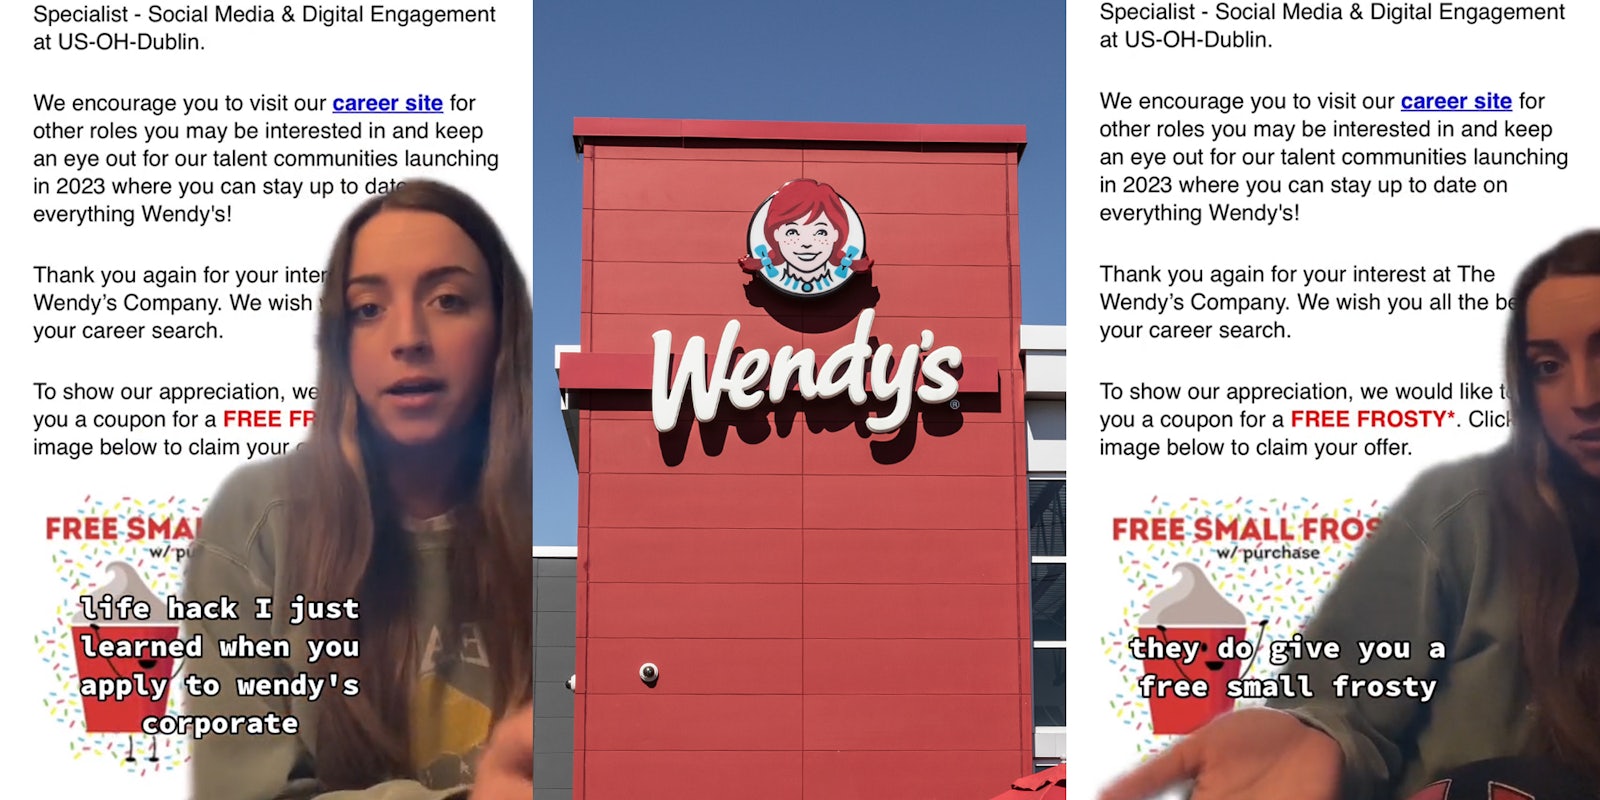 woman greenscreen TikTok over Wendy's application appreciation with caption 'life hack I just learned when you apply to wendy's corporate' (l) Wendy's sign on building with blue sky (c) woman greenscreen TikTok over Wendy's application appreciation with caption 'they do give you a free small frosty' (r)